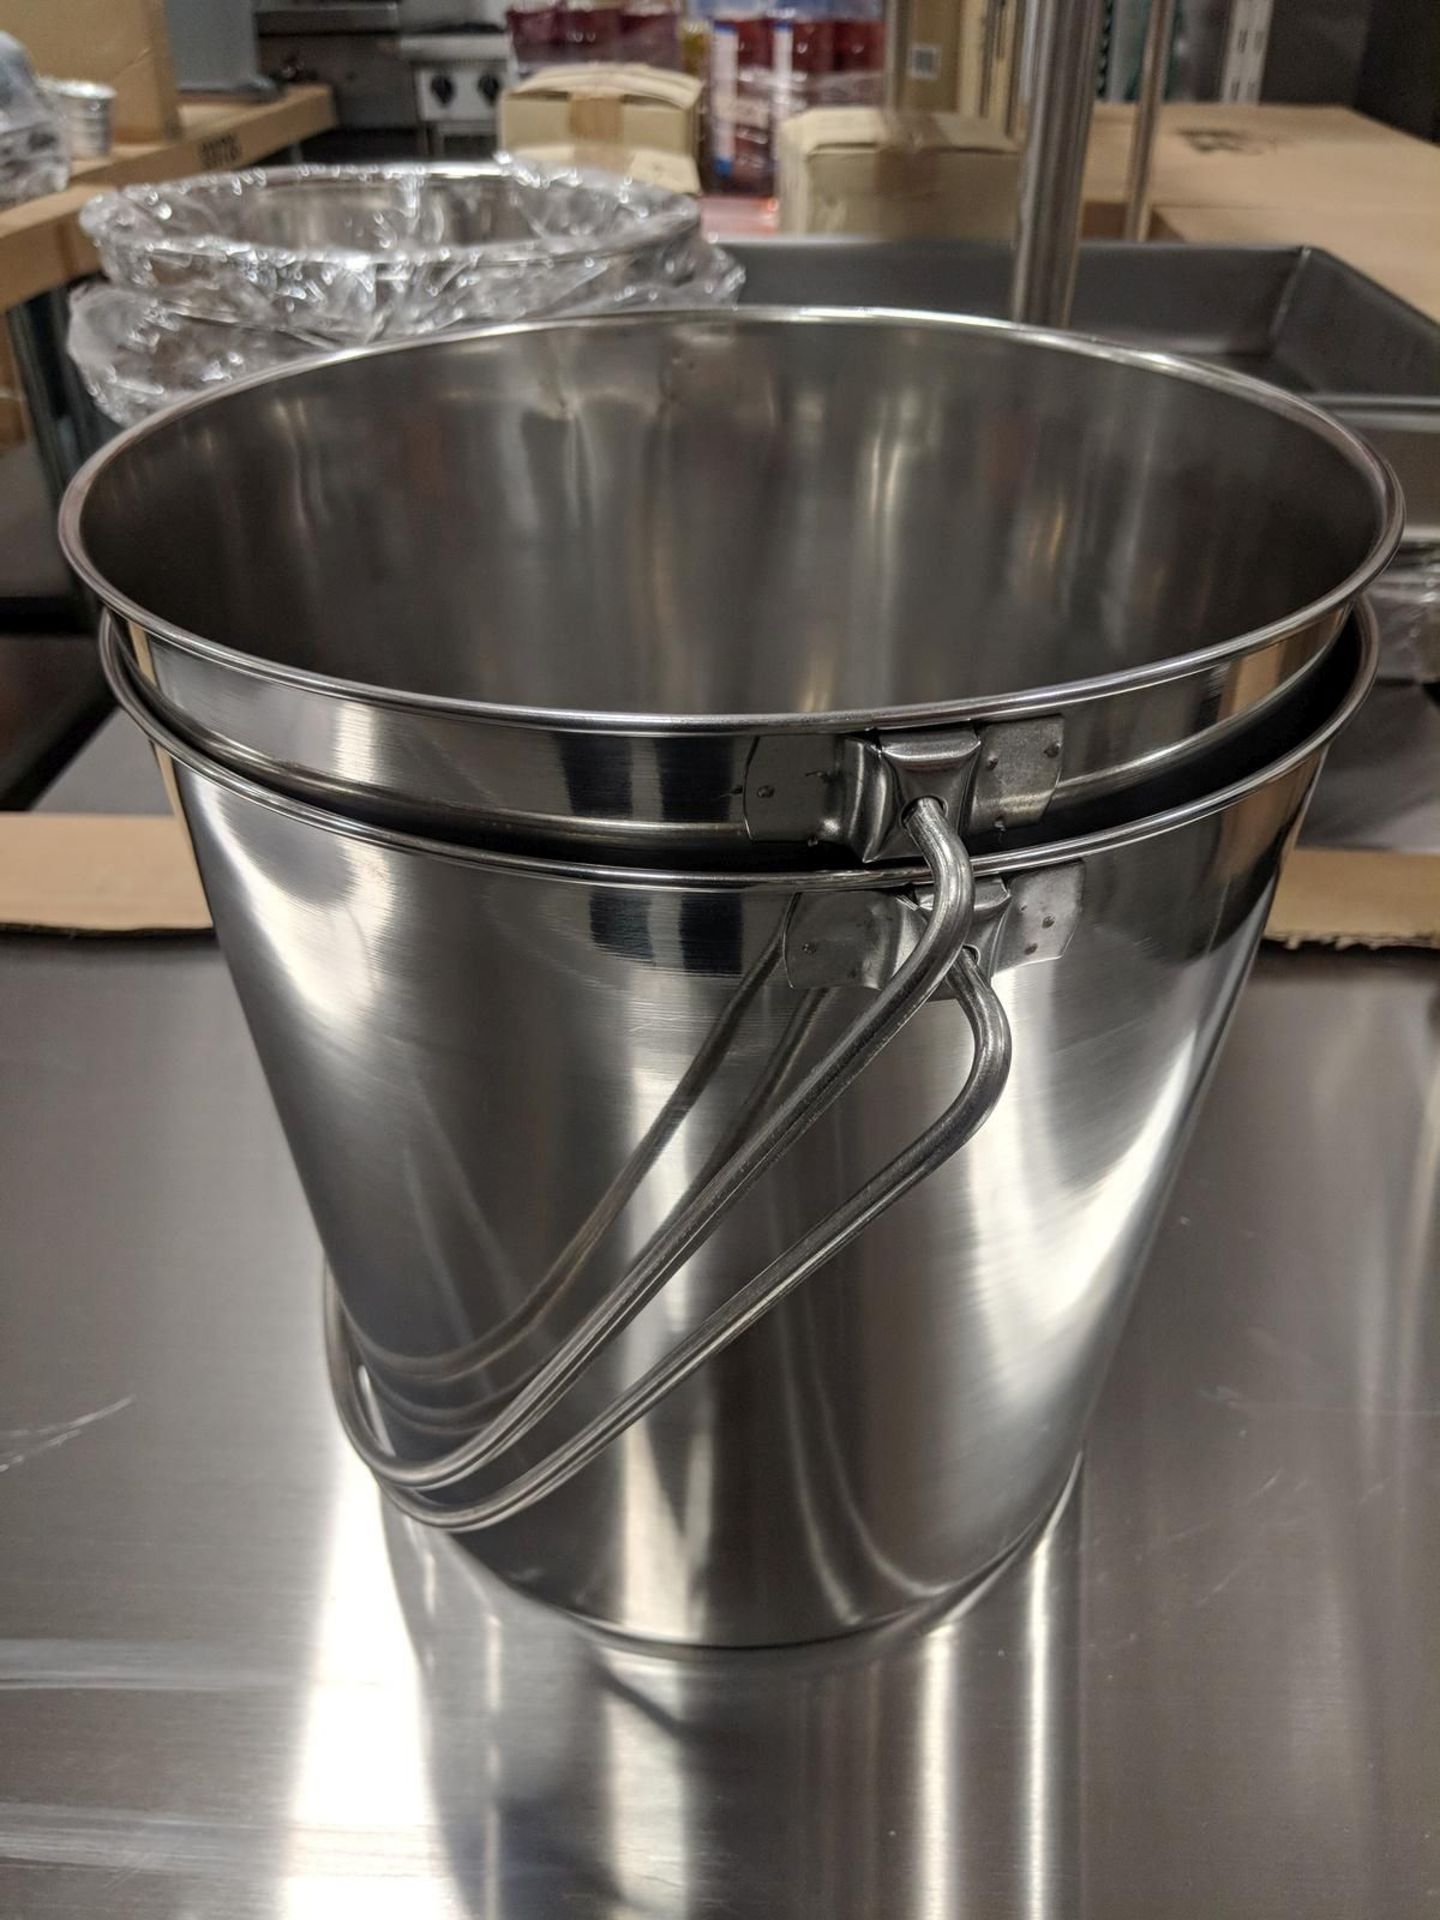 13qt Stainless Steel Utility Pails - Lot of 2 - Image 3 of 4